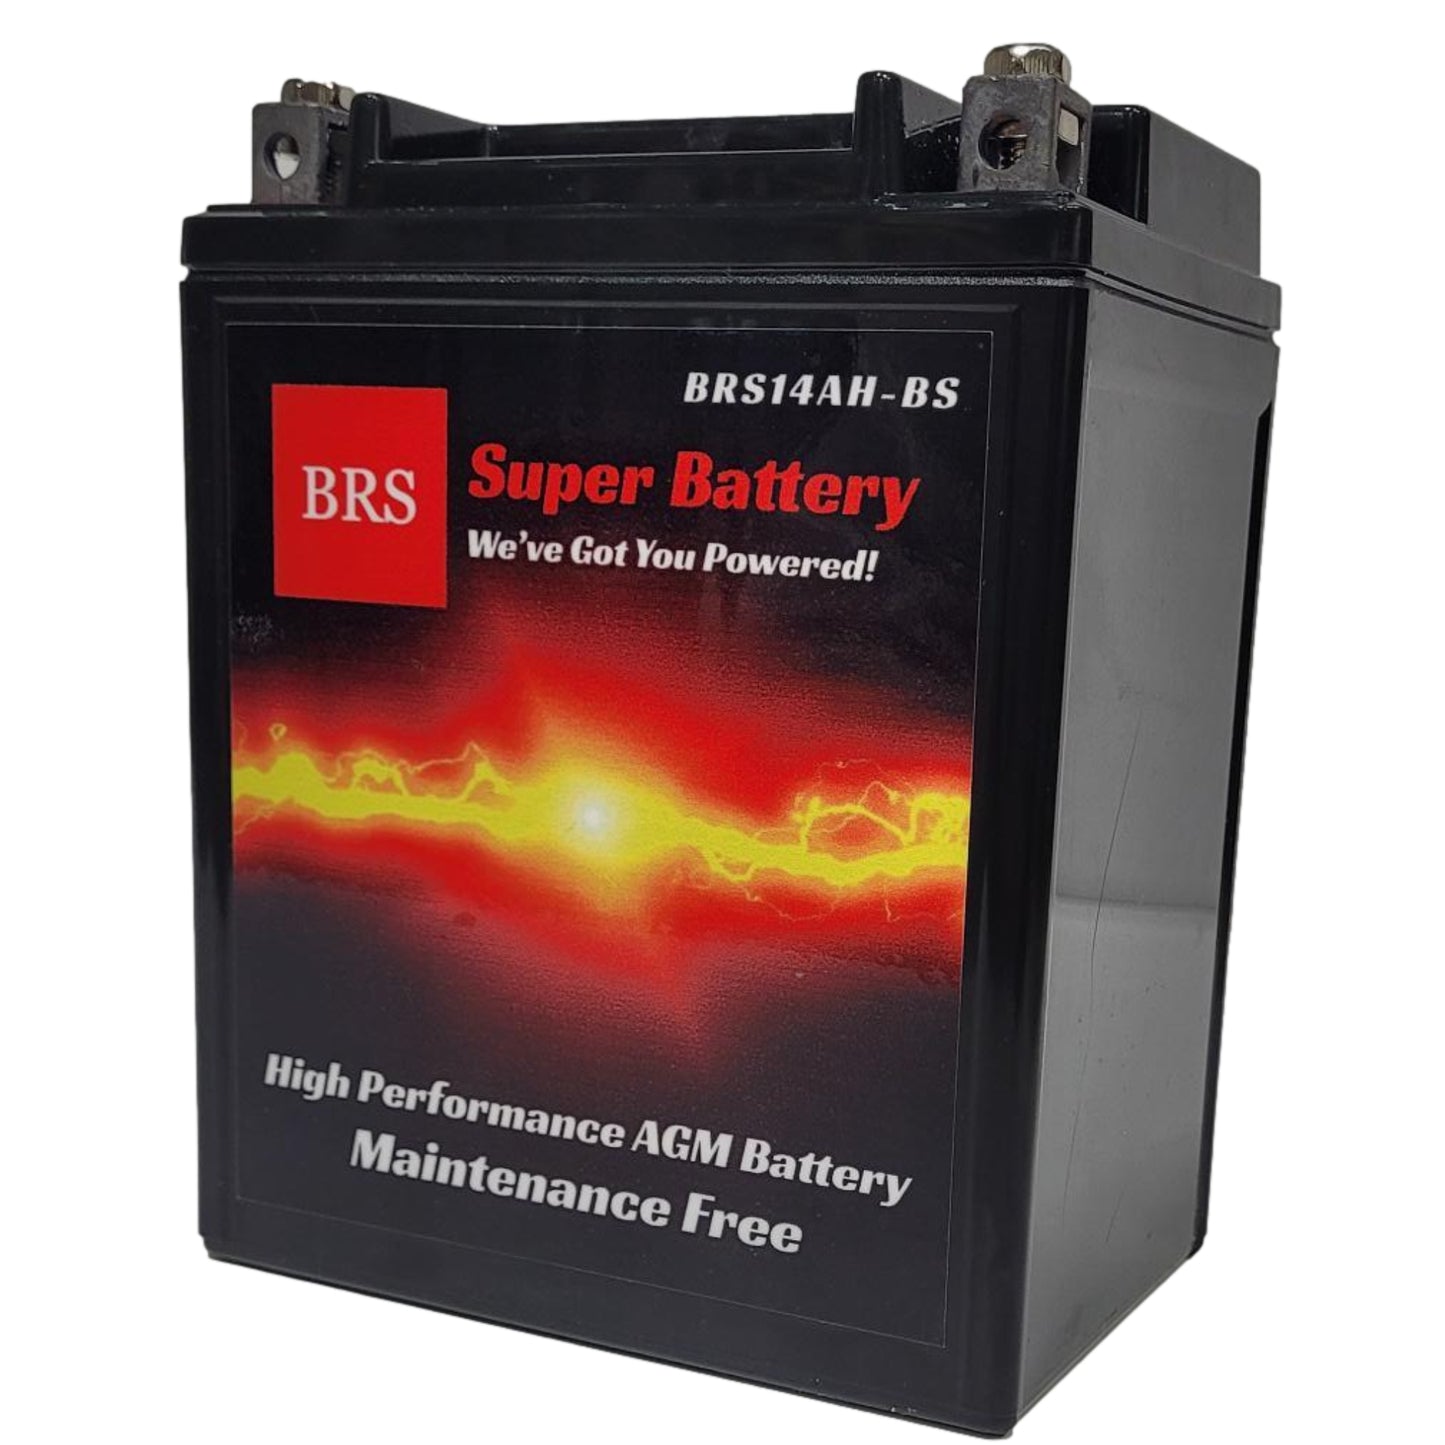 WPX14AH-BS 12v High Performance Sealed AGM PowerSport 10 Year Battery - BRS Super Battery